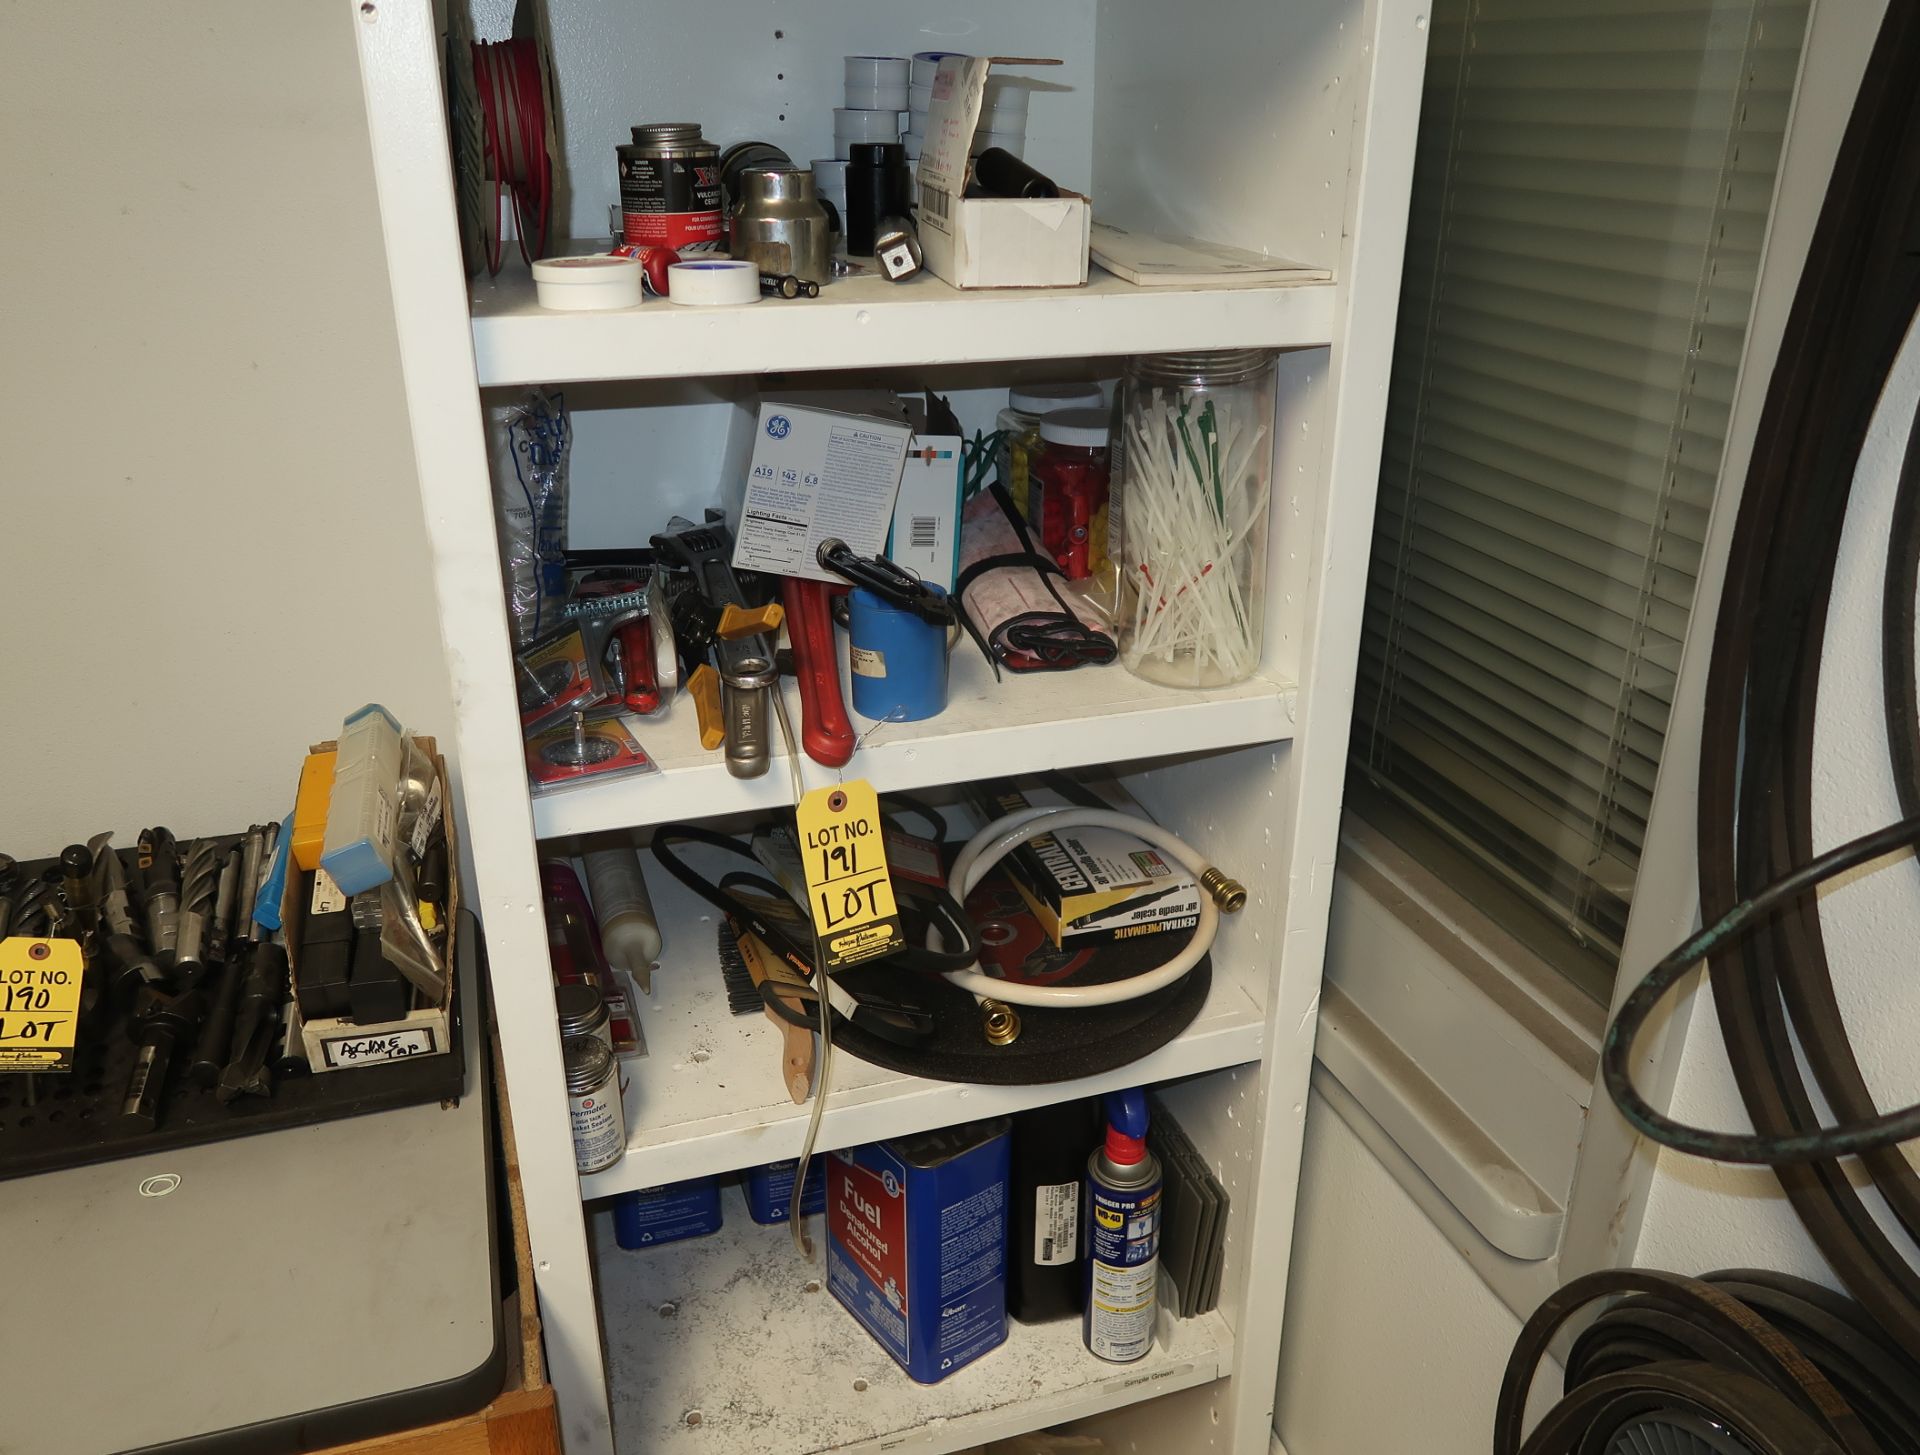 STORAGE SHELF W/ CONTENTS; WRENCHES, WIRE, HOSES, BRUSHES, ELECTRICAL EQUIPMENT, ETC.